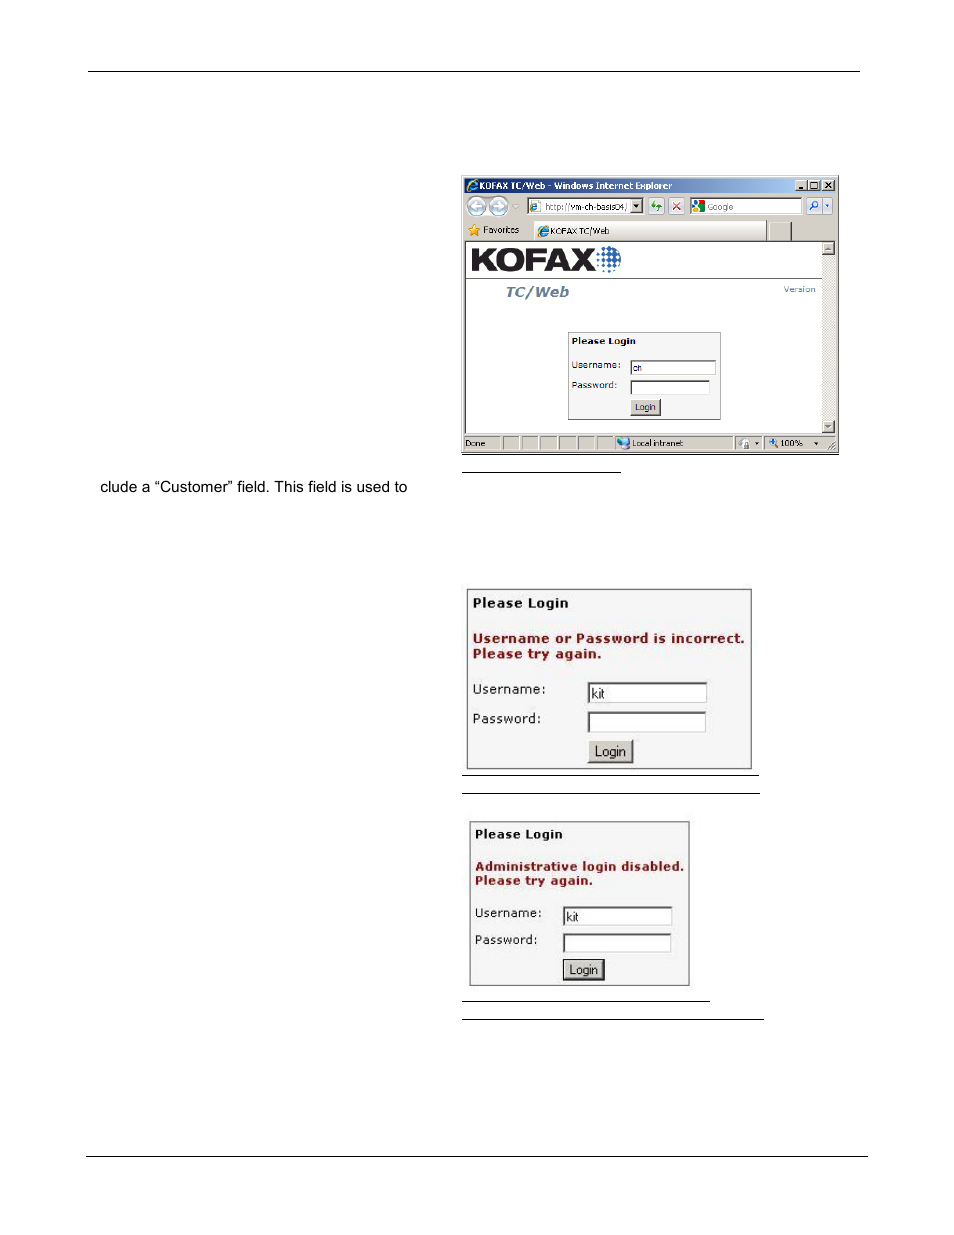 Standard features, 1 getting started, 1 login errors | Kofax Communication Server 9.1.1 User Manual | Page 6 / 85